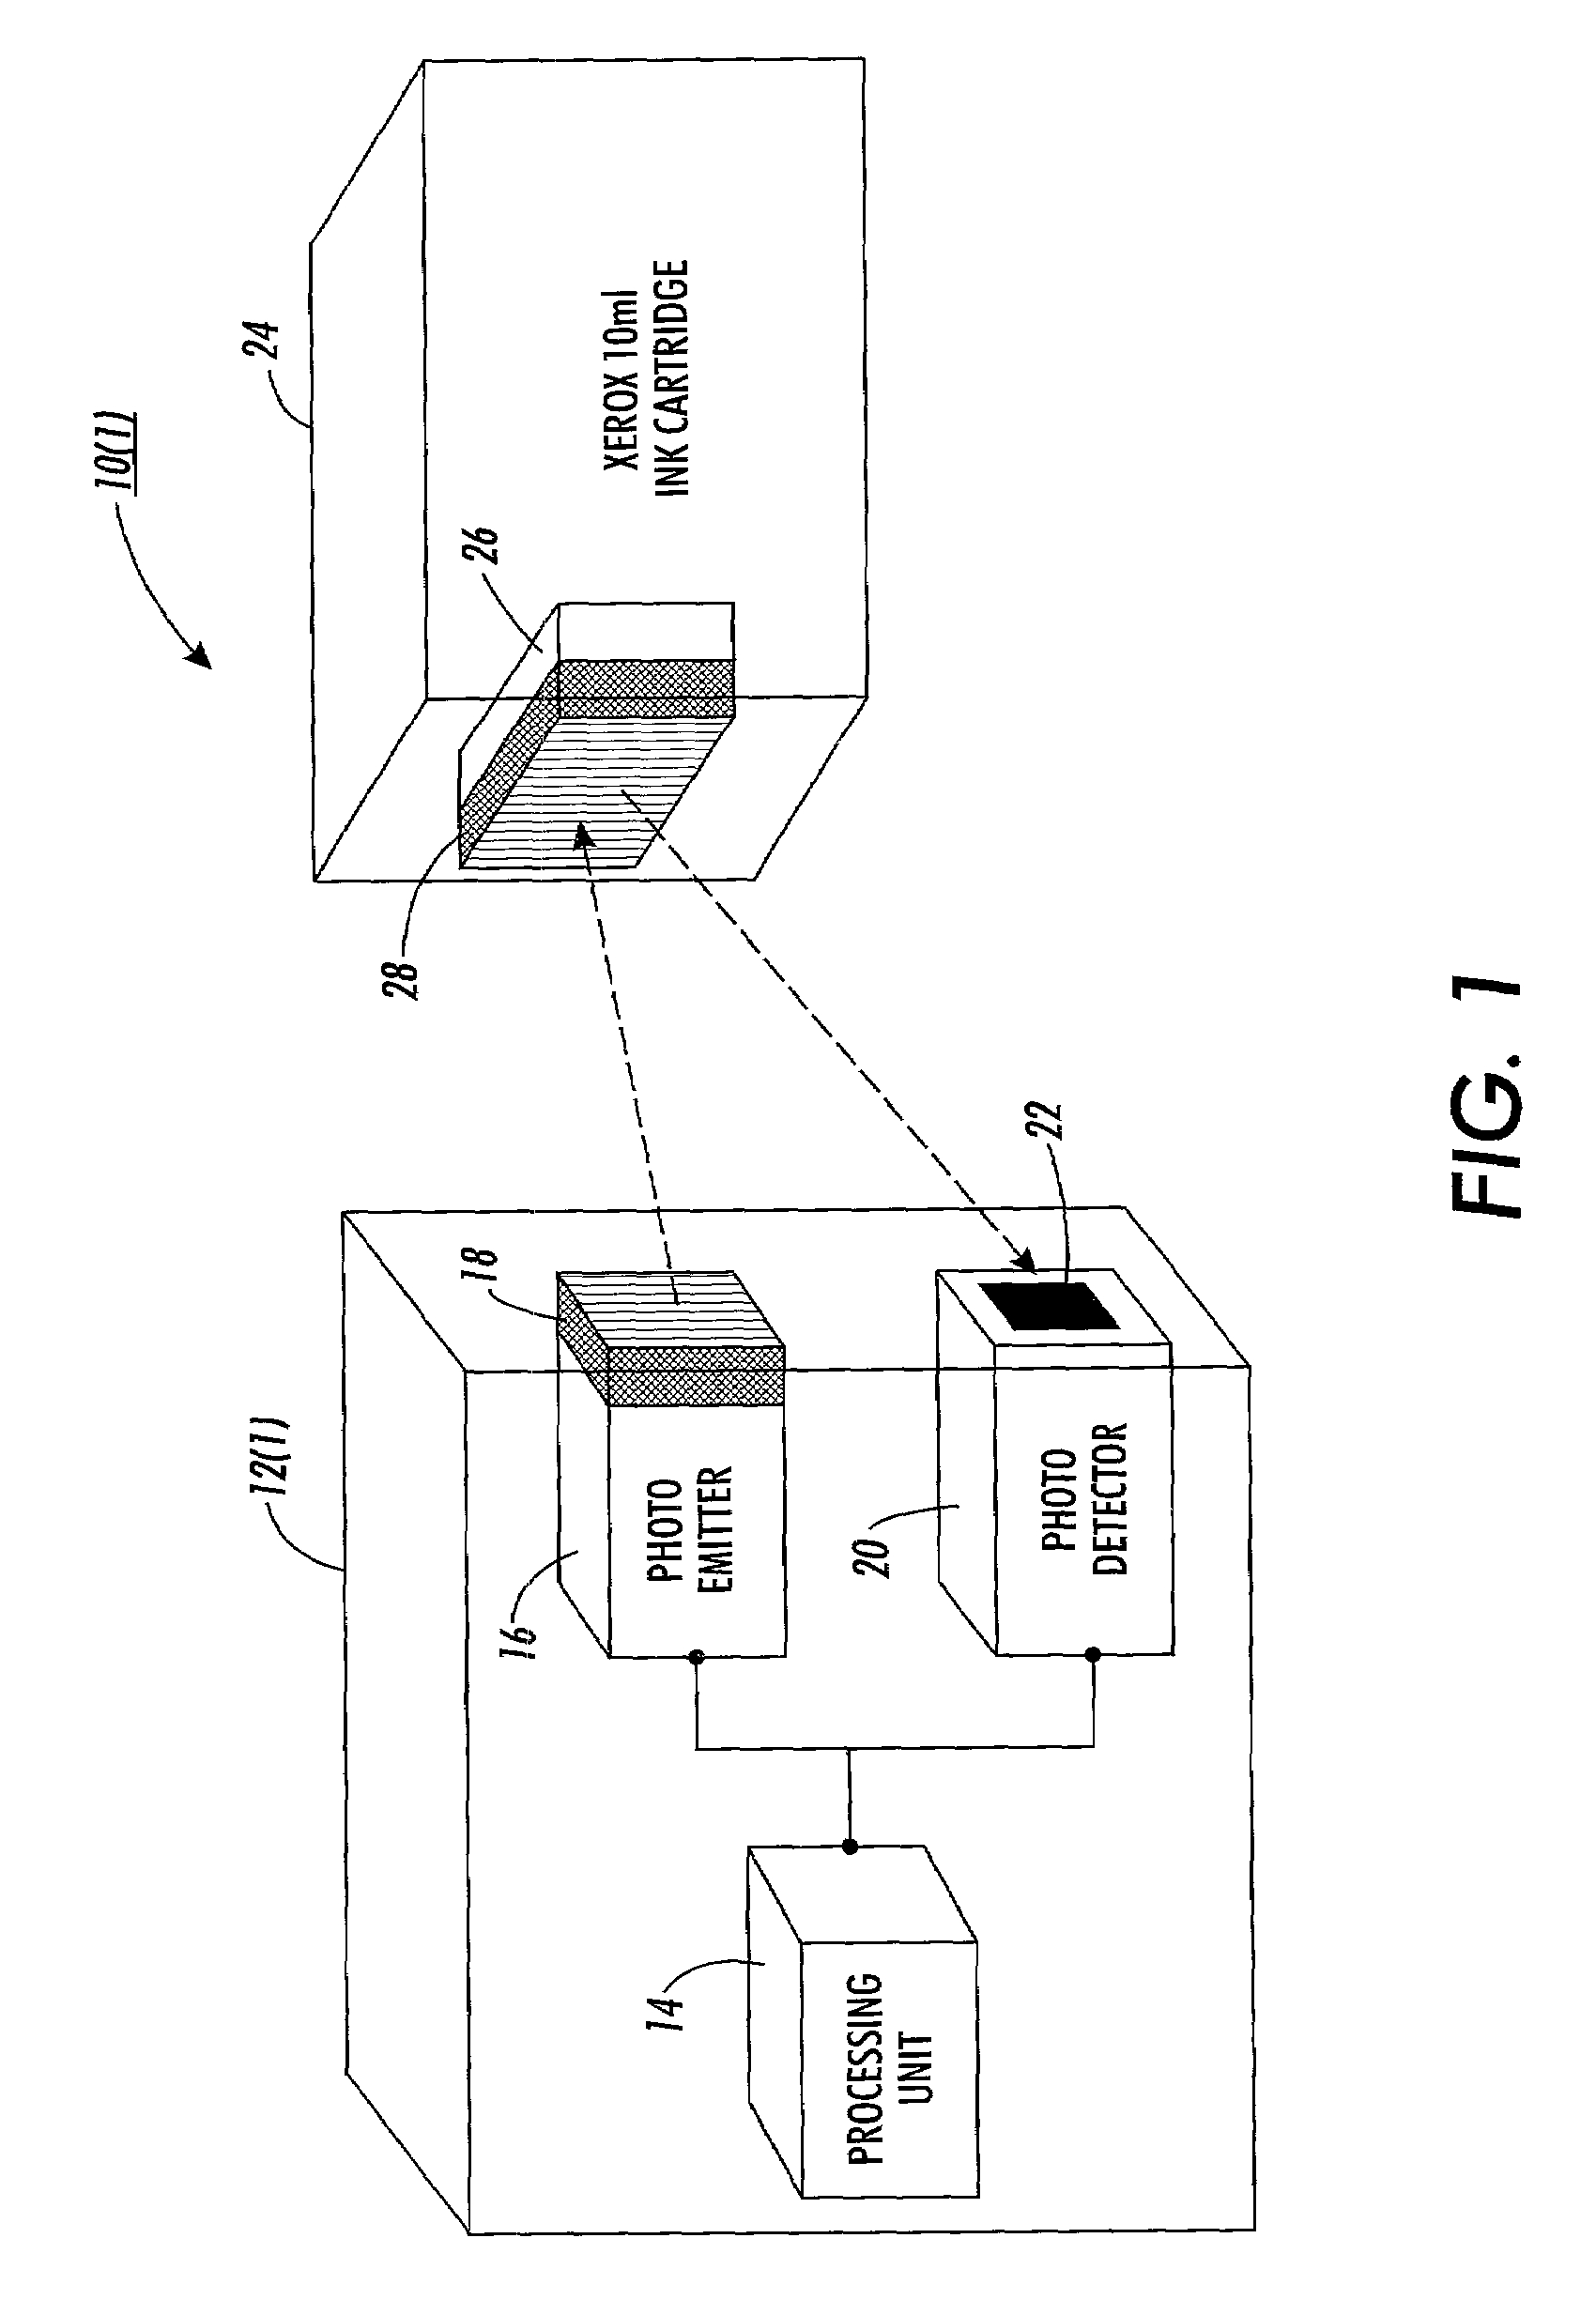 System and method for identifying objects